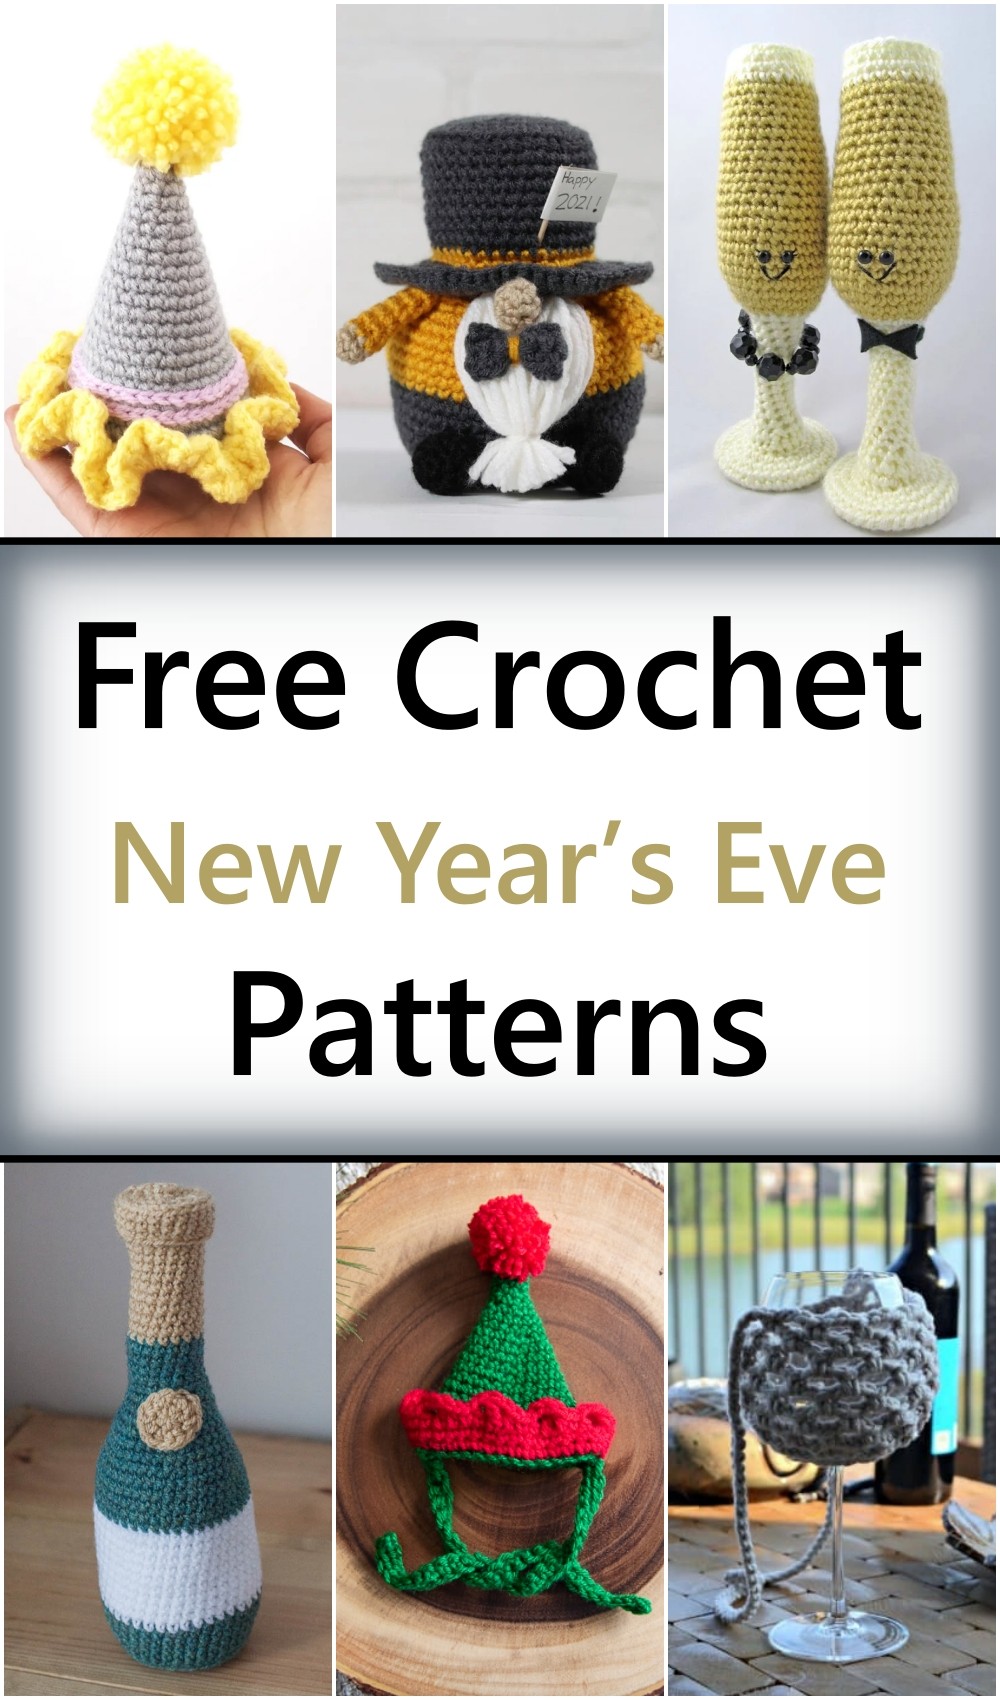 Free Crochet New Year’s Eve Patterns